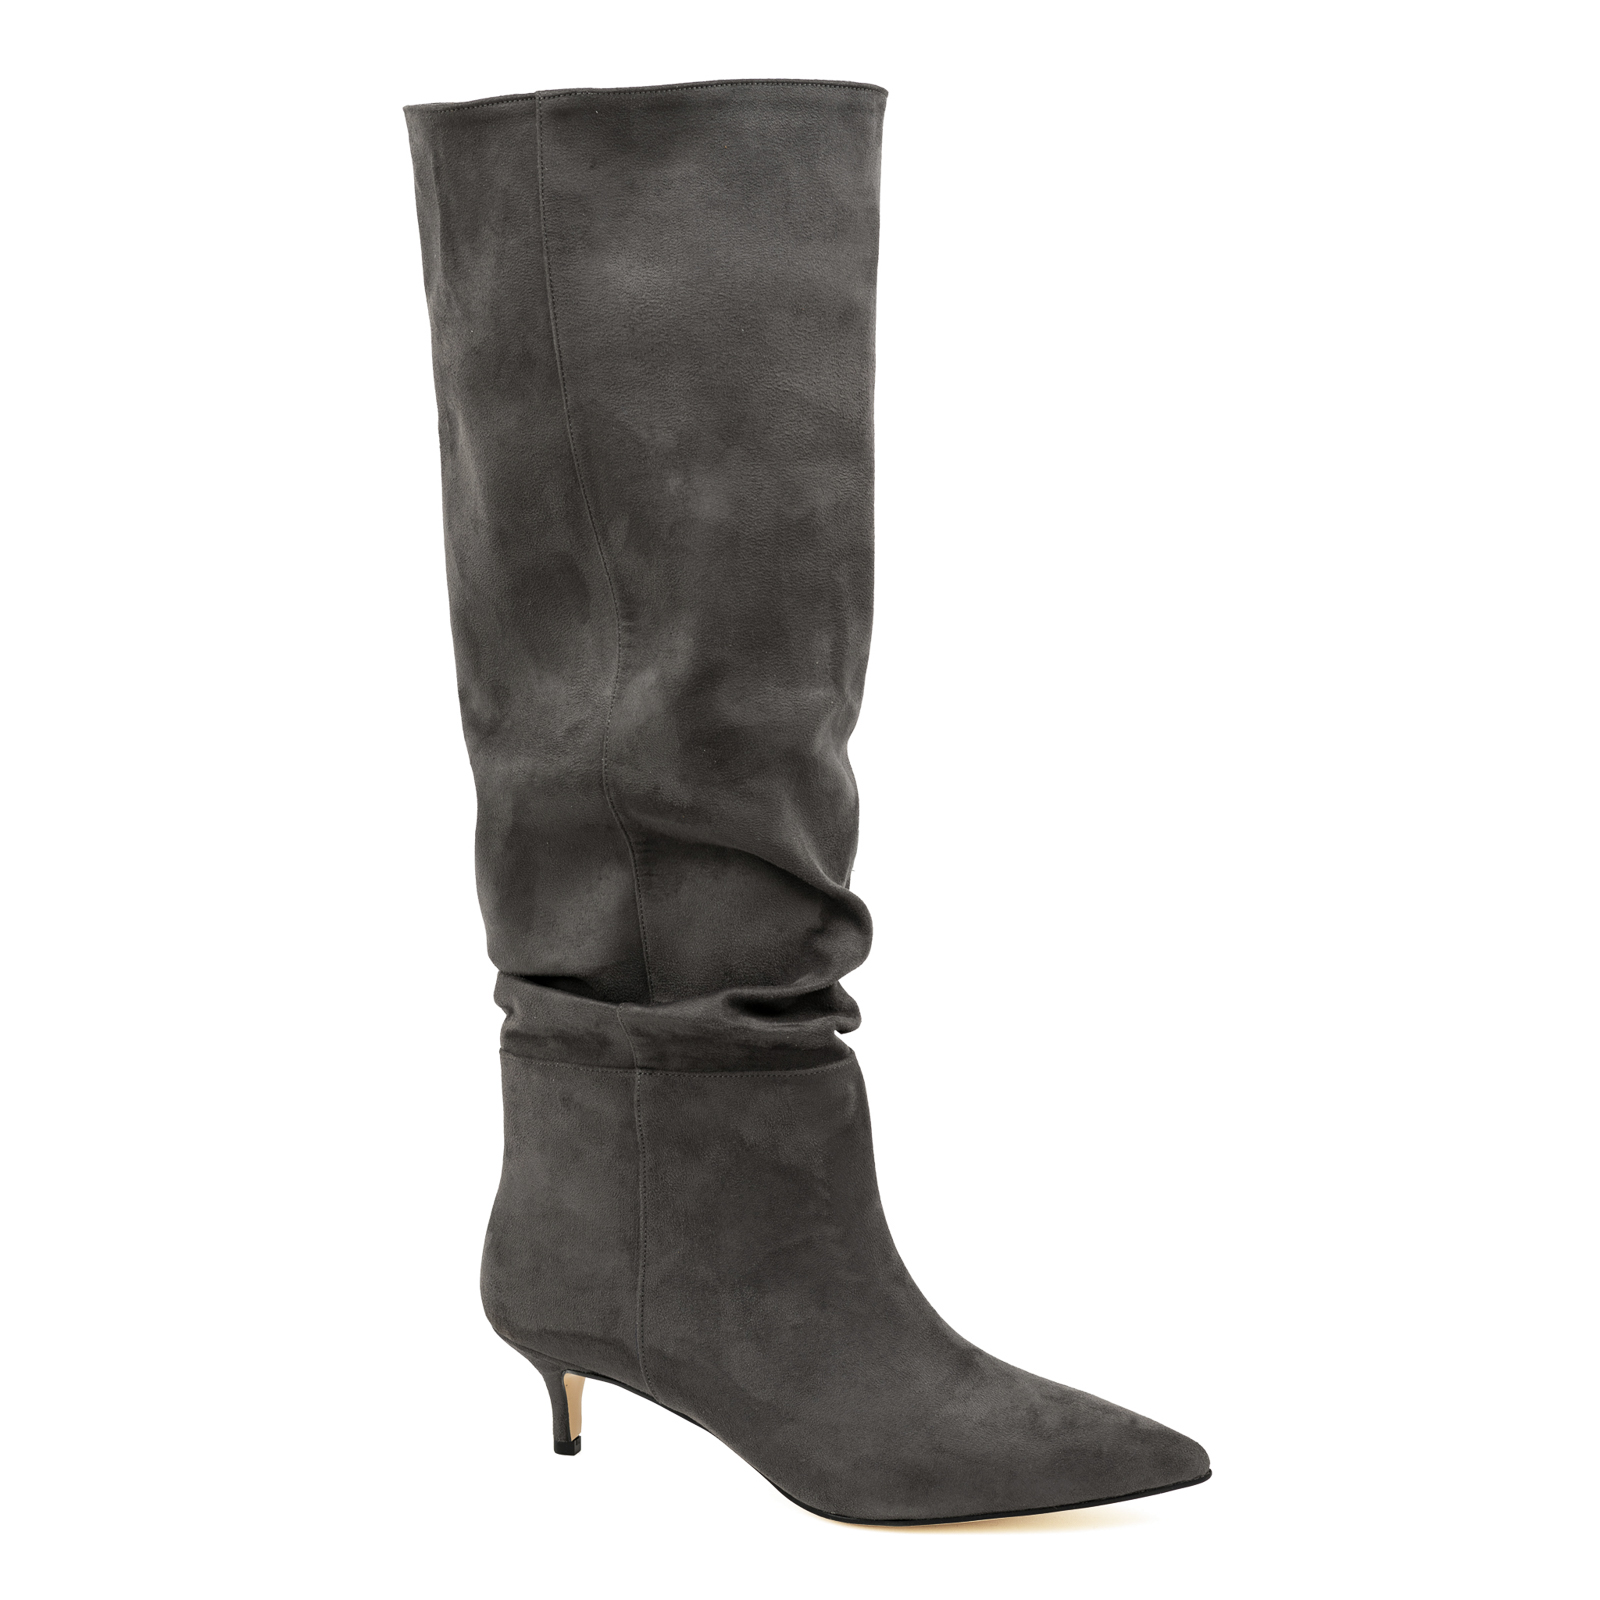 VELOUR WRINKLED SPIKE BOOTS WITH THIN HEEL - GRAY